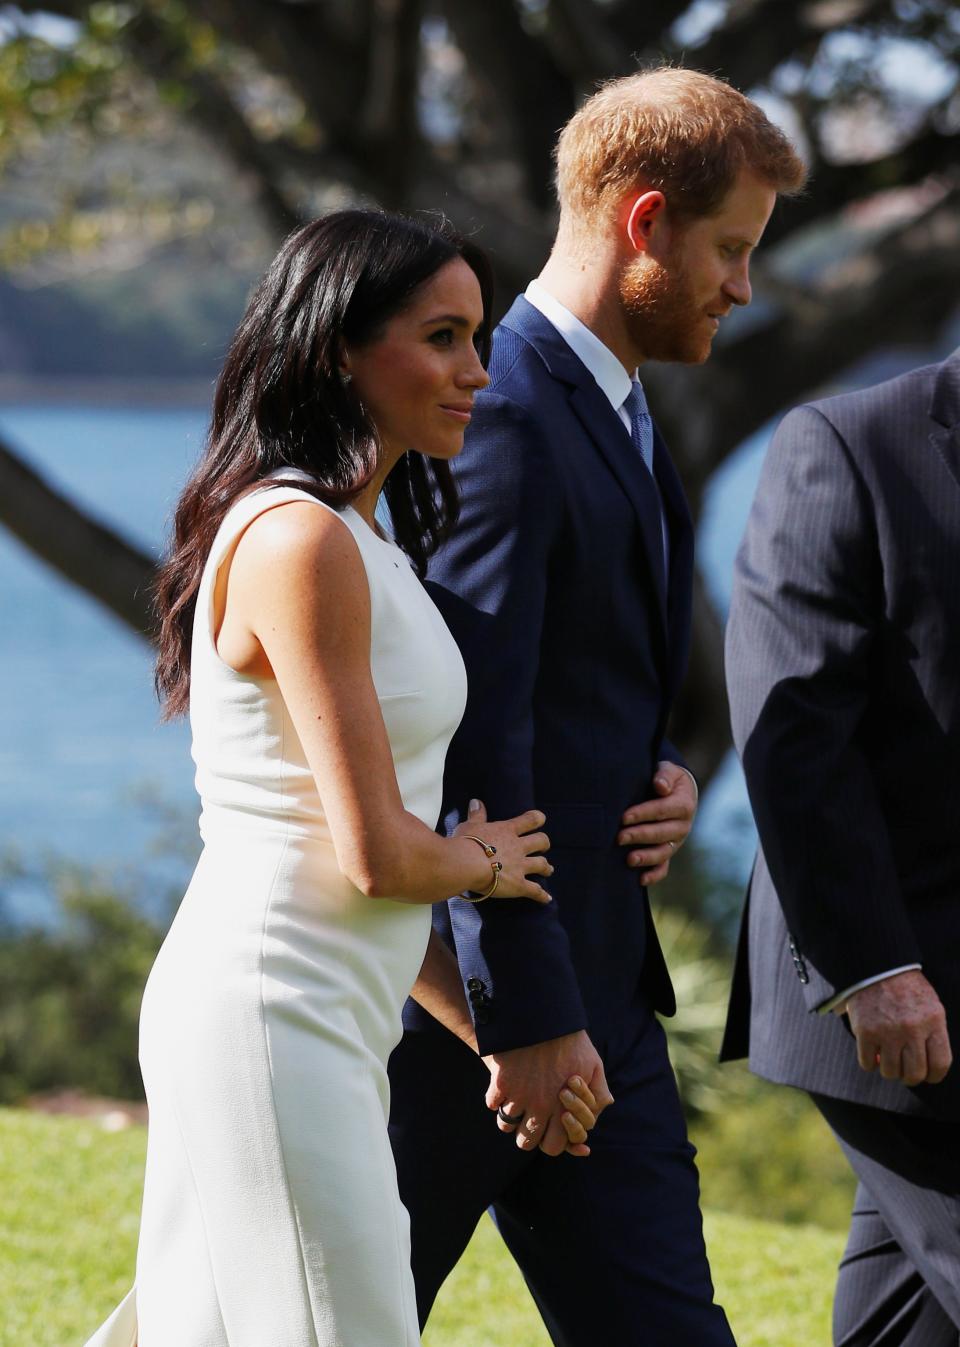 Meghan Markle and Prince Harry attended an official visit in Sydney, Australia, just hours after announcing Meghan's pregnancy.